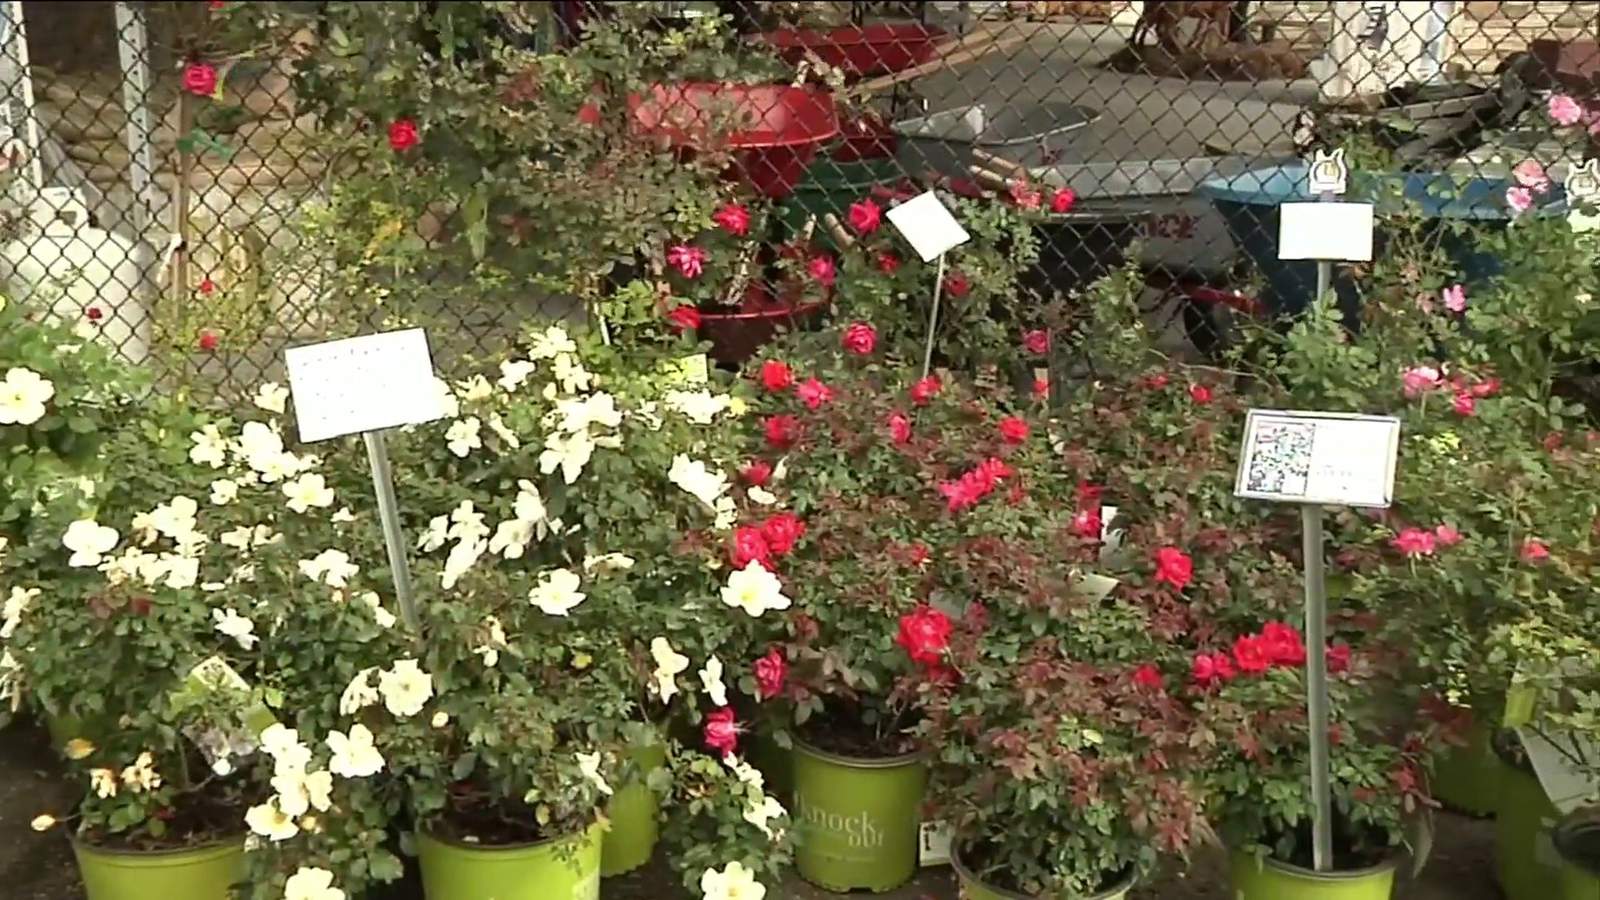 As warm weather arrives in January, here are some gardening tips